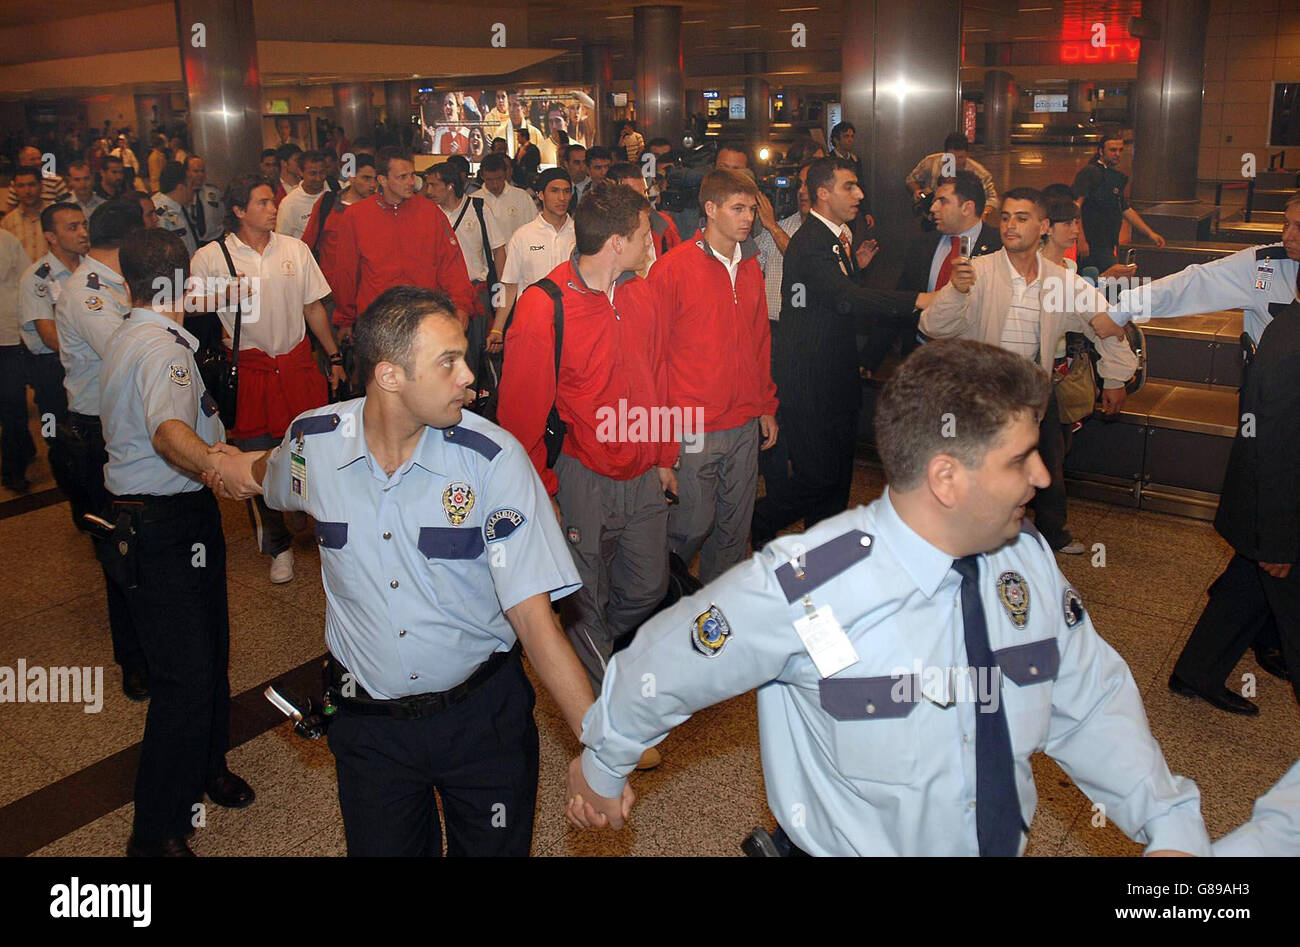 Soccer - UEFA Champions League - Final - AC Milan v Liverpool - Istanbul Airport Stock Photo